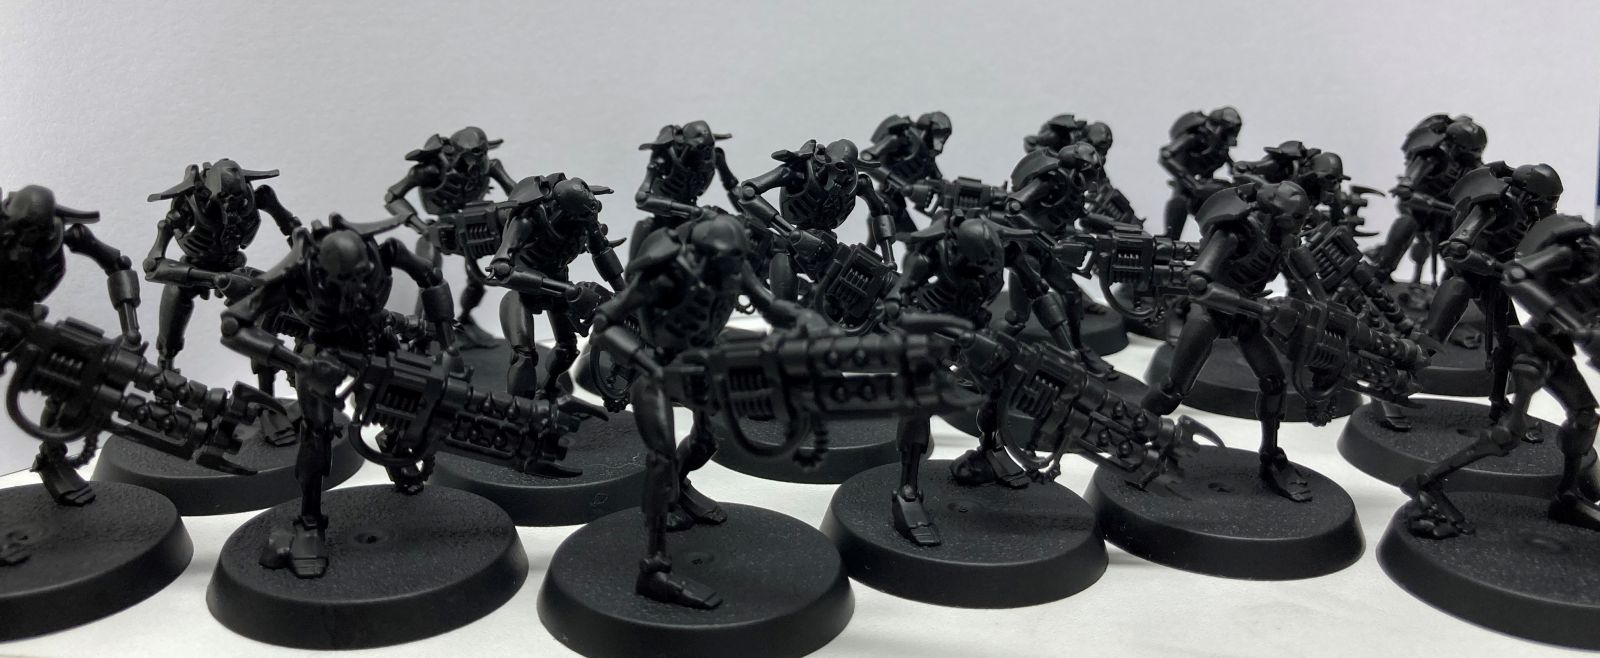 Magat the Cursed - Necrons